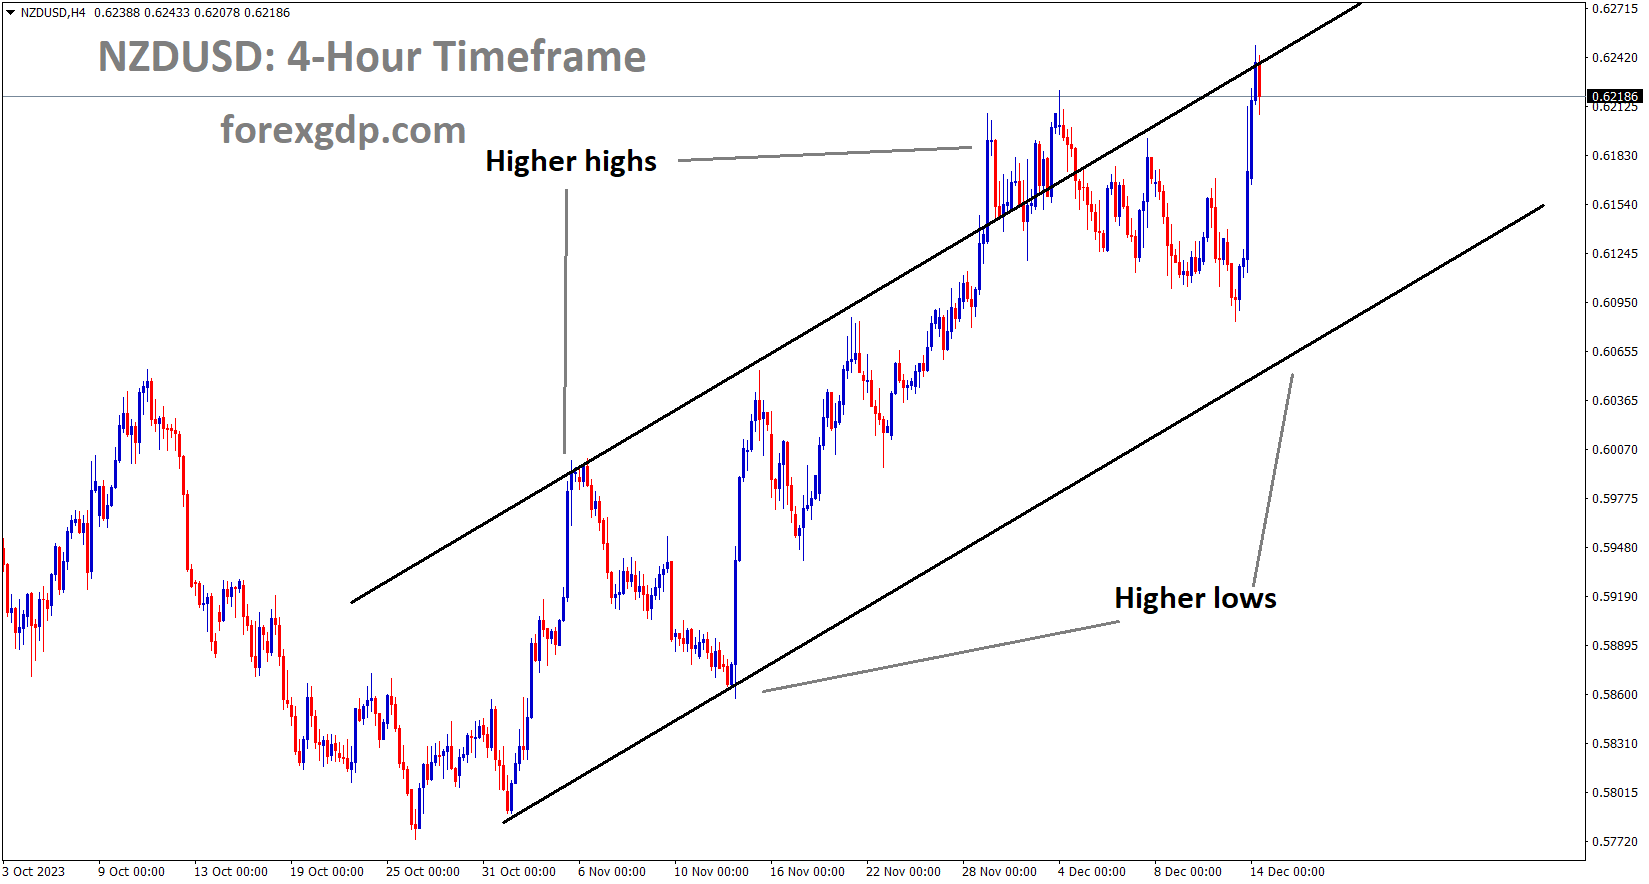 NZDUSD is moving in an Ascending channel and the market has reached the higher high area of the channel